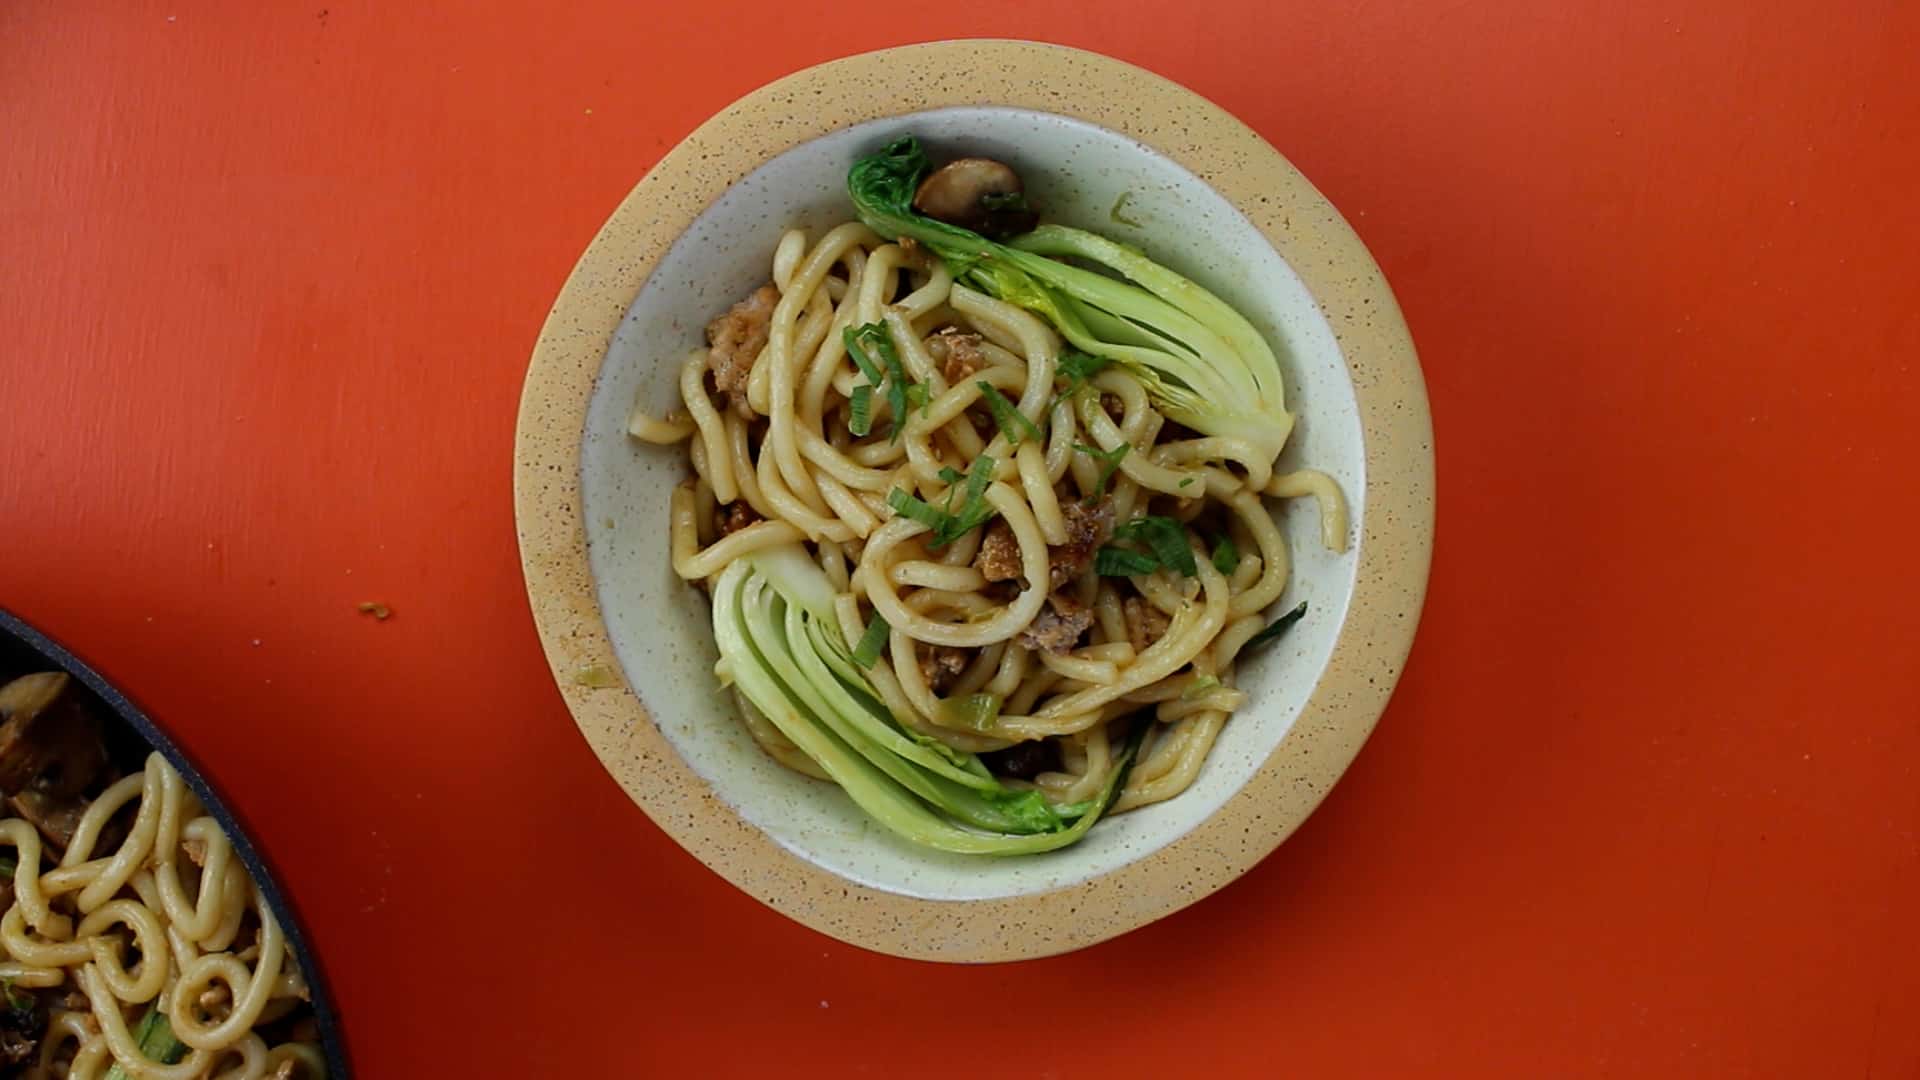 Stir-fry Pork Udon Noodles  with pak choi  and spring onion slices served in a dish on an orange background.